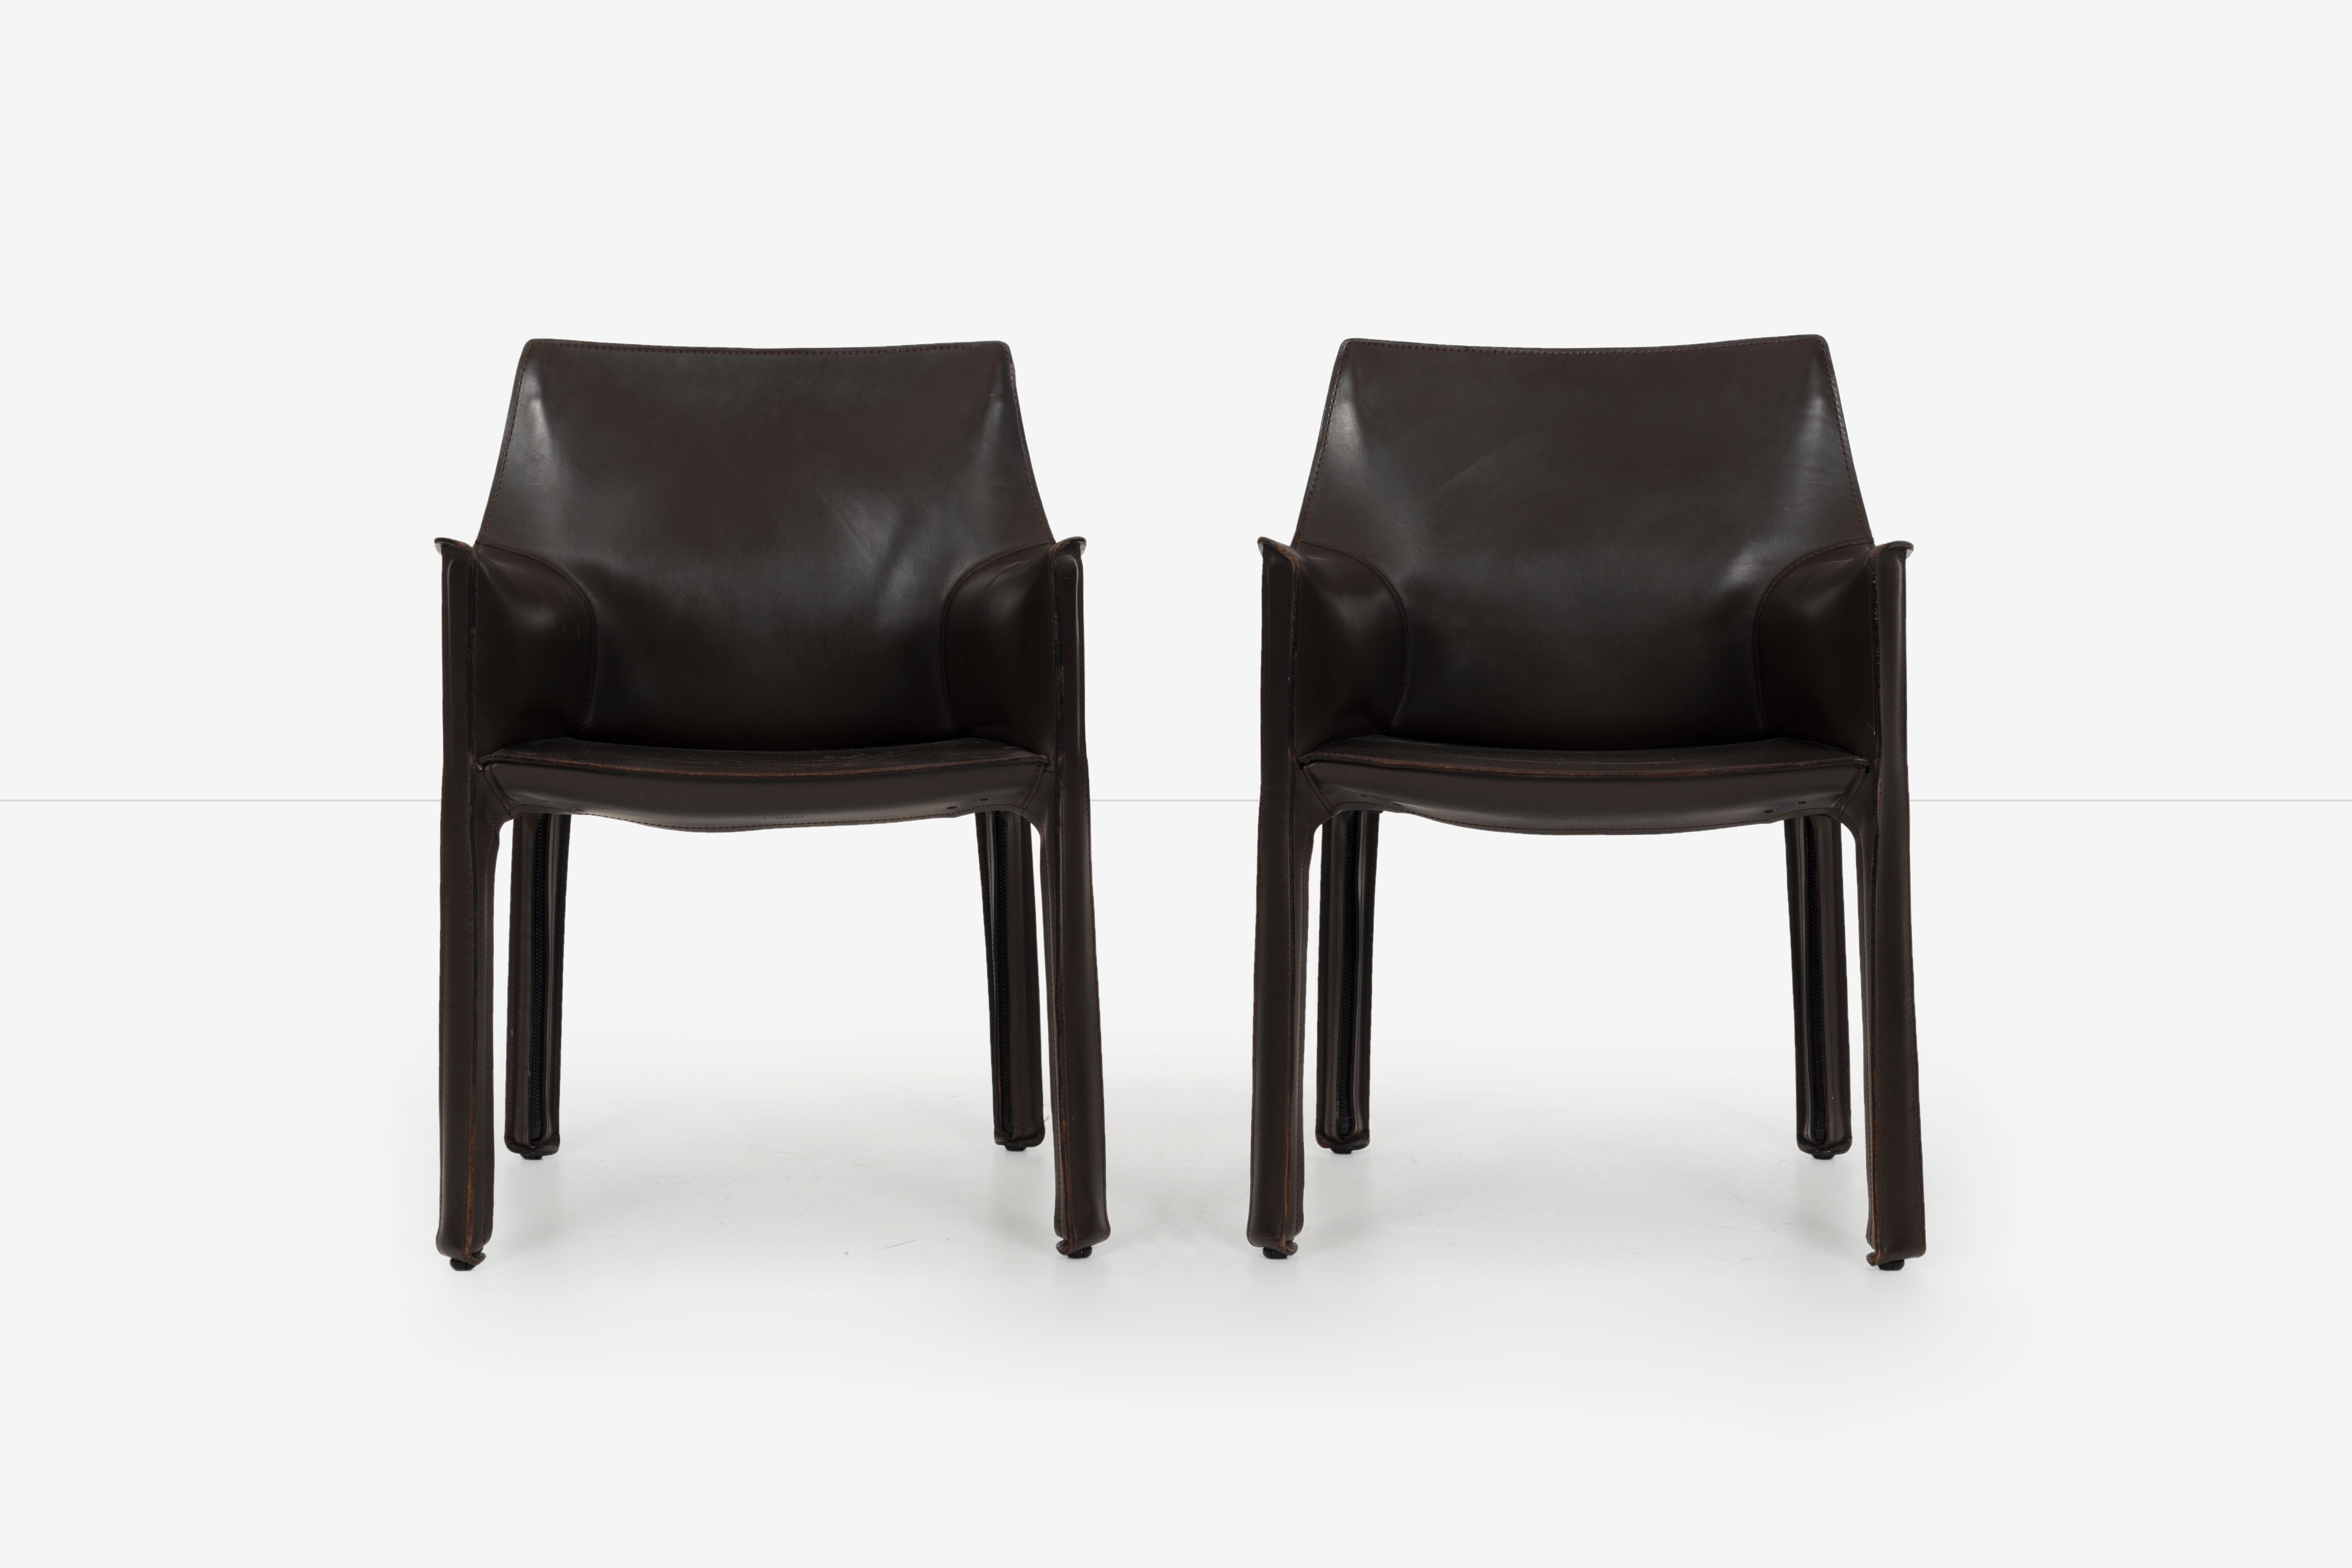 Set of 8 Mario Bellini cab chairs, chocolate brown leather with 6 (model 412) side chairs and 2 (model 413) armchairs.
Cab was the first-ever chair to feature a free-standing leather structure, inspired by how our skin fits over our skeleton. The